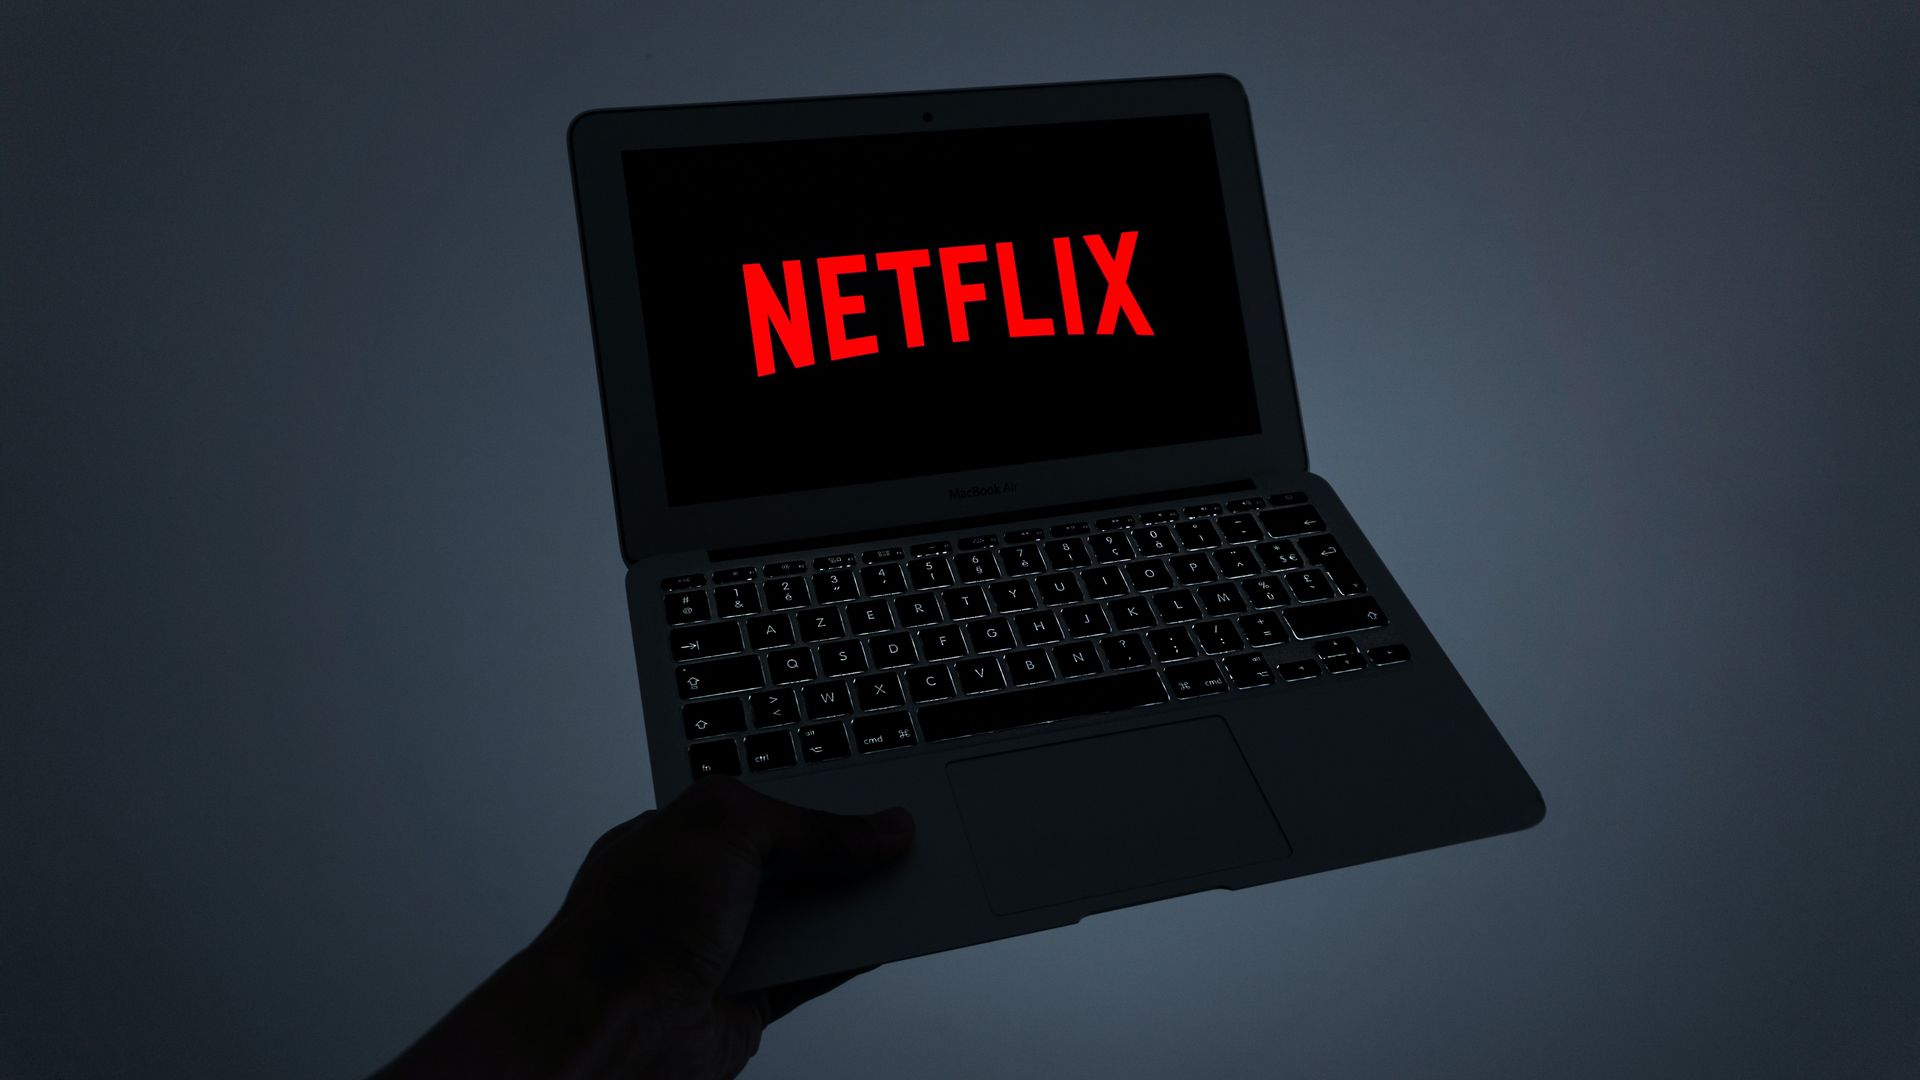 How to get the best streaming experience on Netflix?